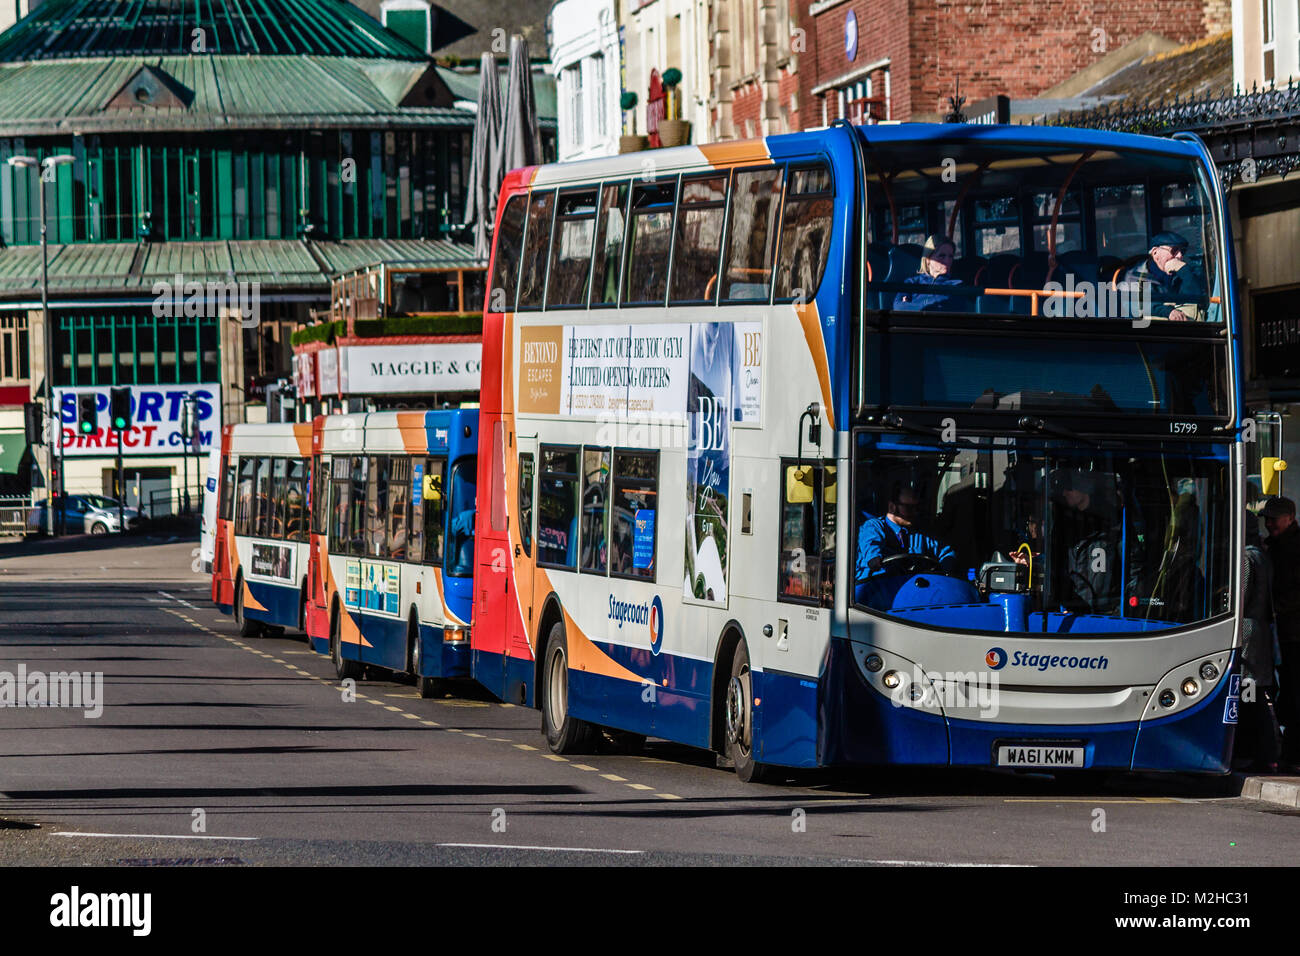 Stagecoach buses in Torquay town centre, Torquay, Torbay, Devon, UK. February 2018. Stock Photo